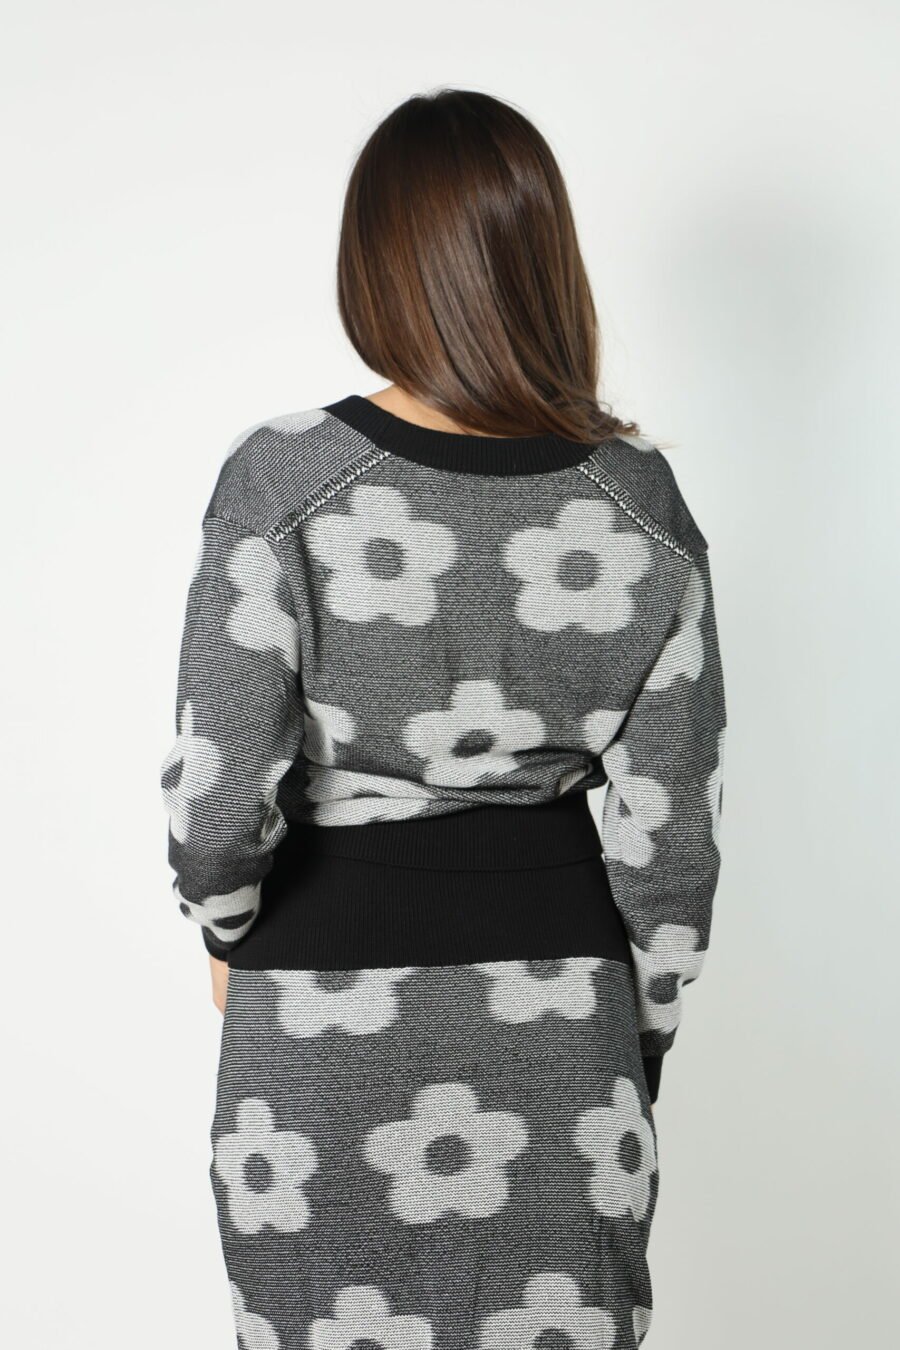 Jersey gris con botones "all over boke flower logo " - 8052865435499 450 scaled